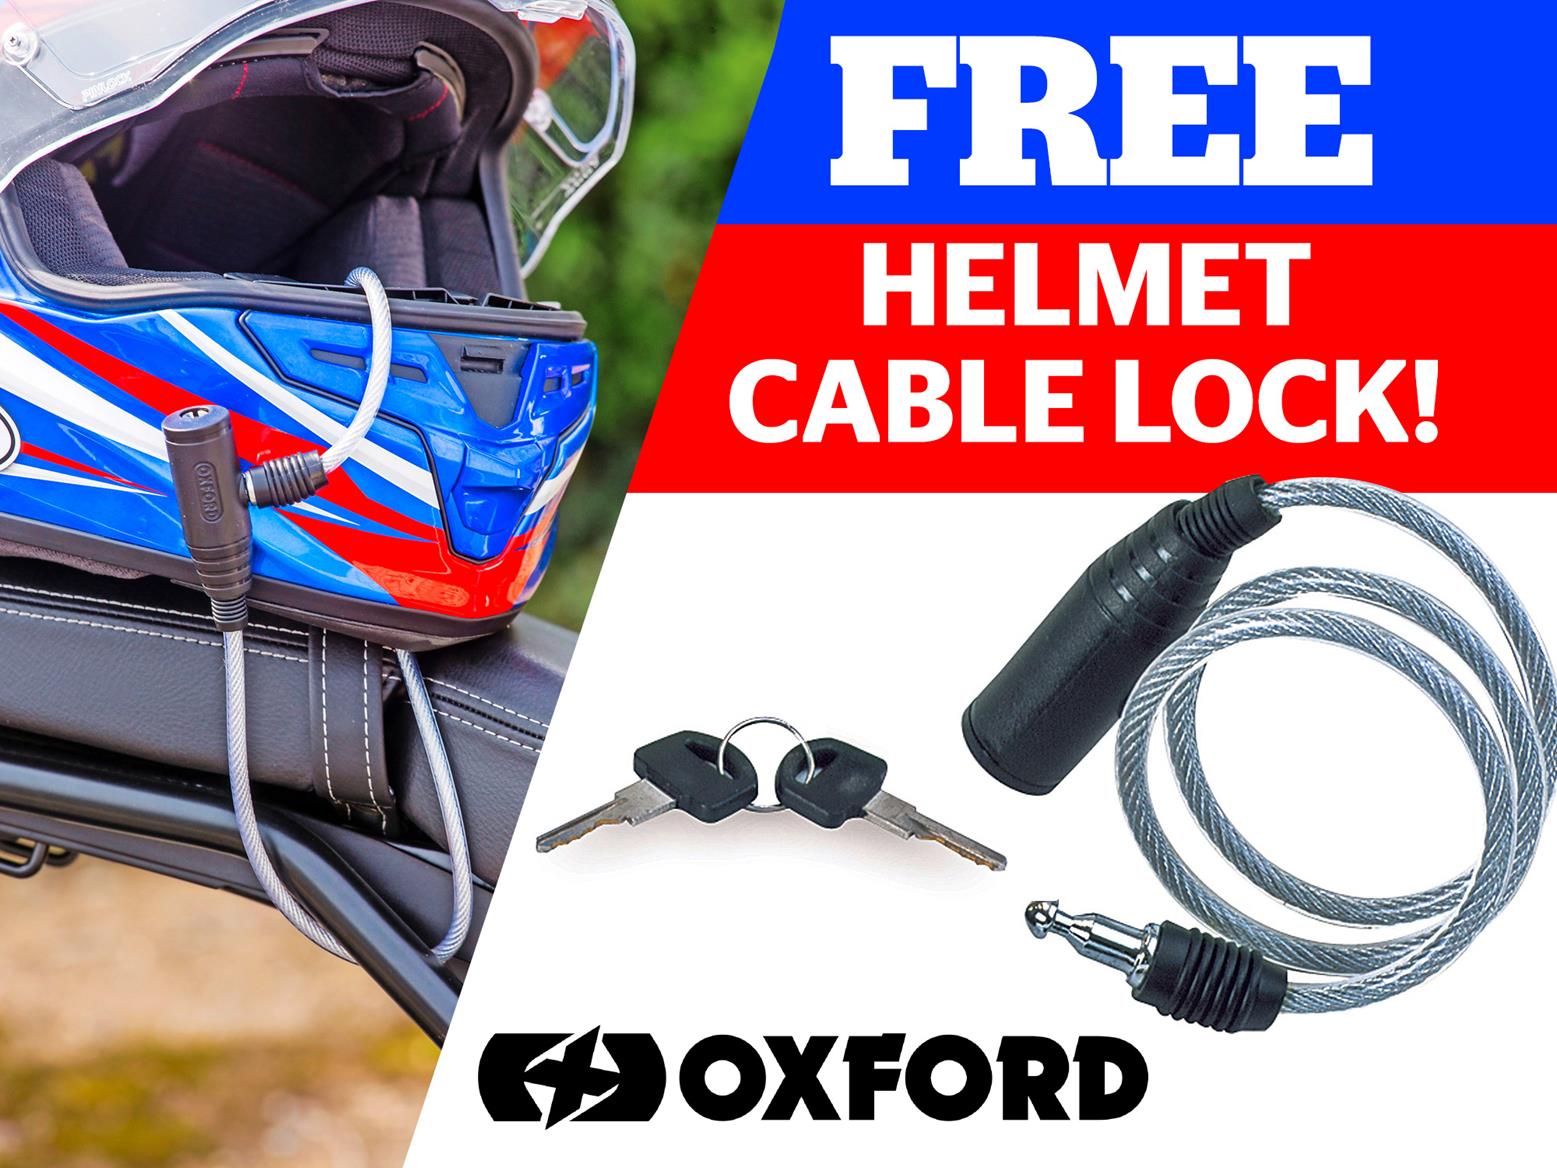 Get a free Oxford helmet cable lock worth £3.99 | MCN